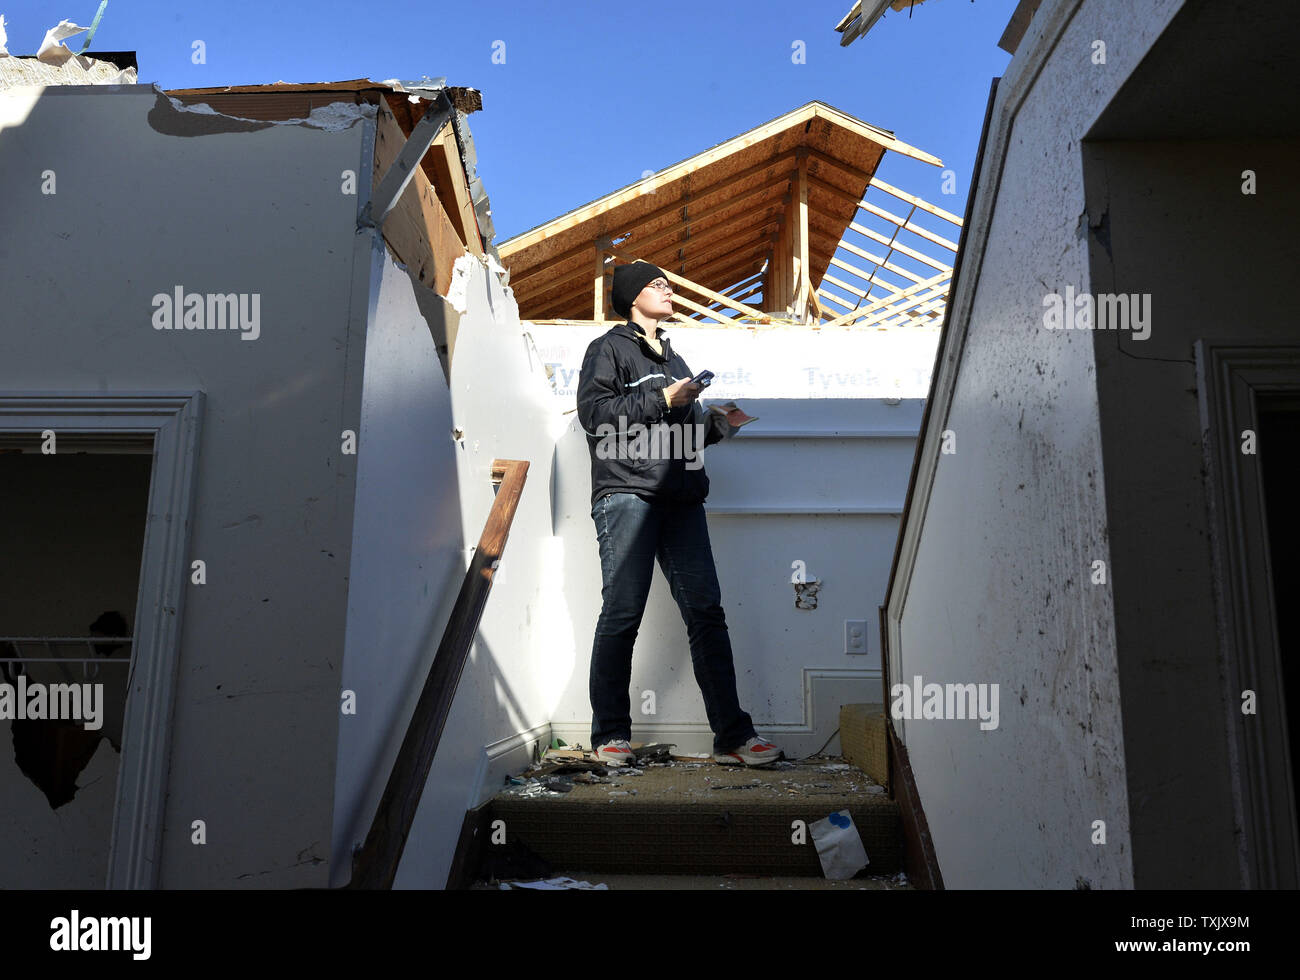 Helen Potts surveys the damage to her home in Washington, Illinois on November 18, 2013. Six people died and hundreds of homes were destroyed in Illinois as 81 tornadoes were sighted on November 17 throughout 12 midwest states including the EF4 tornado that struck Washington, Illinois.     UPI/Brian Kersey.     UPI/Brian Kersey Stock Photo